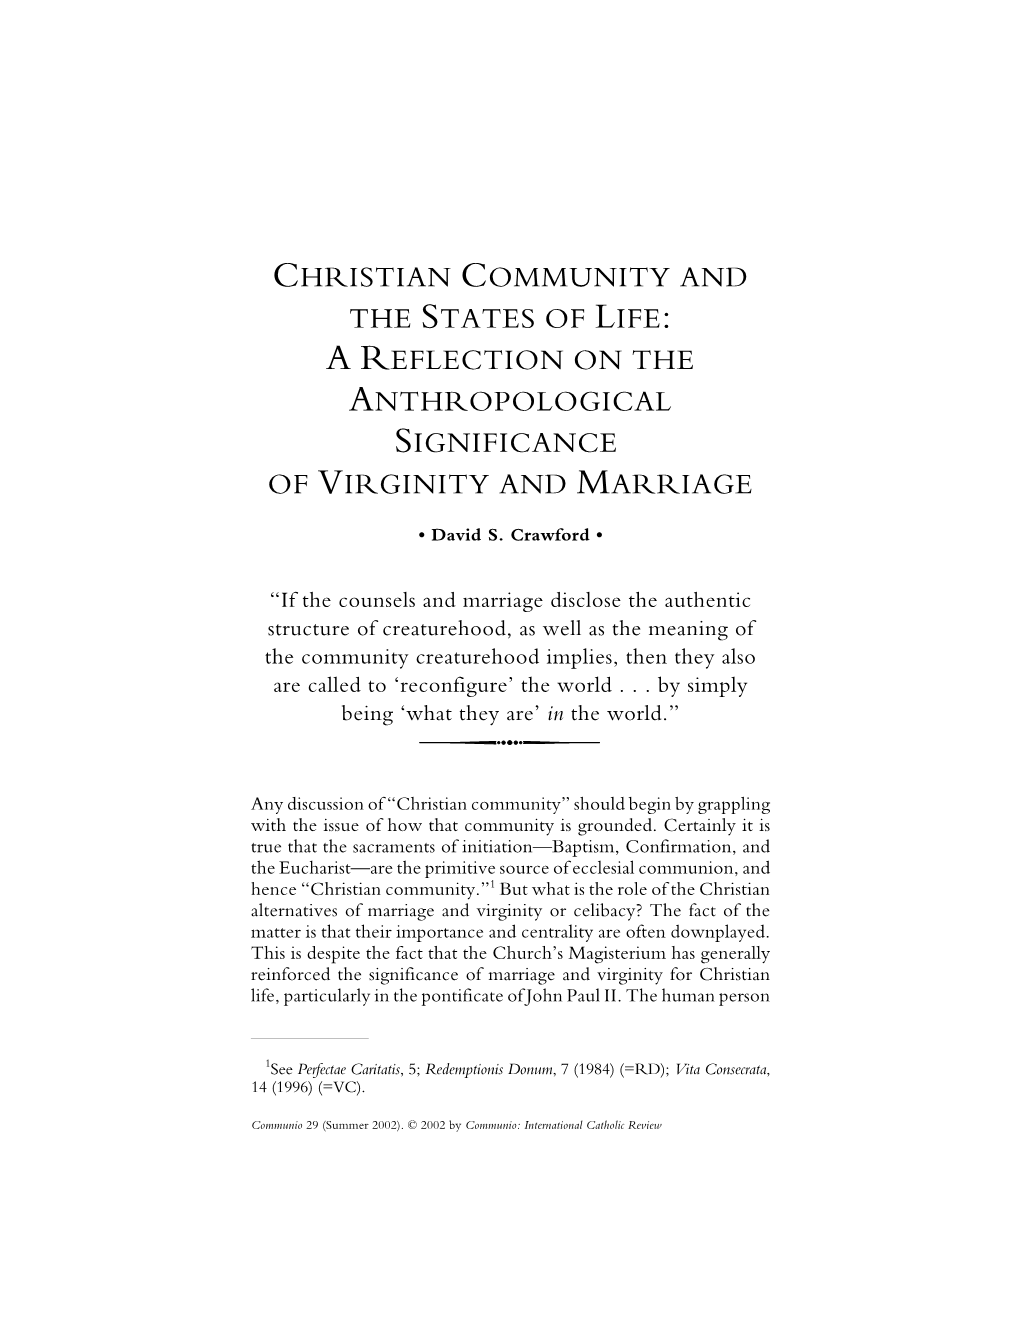 David S. Crawford. Christian Community and the States of Life. Communio Summer 2002